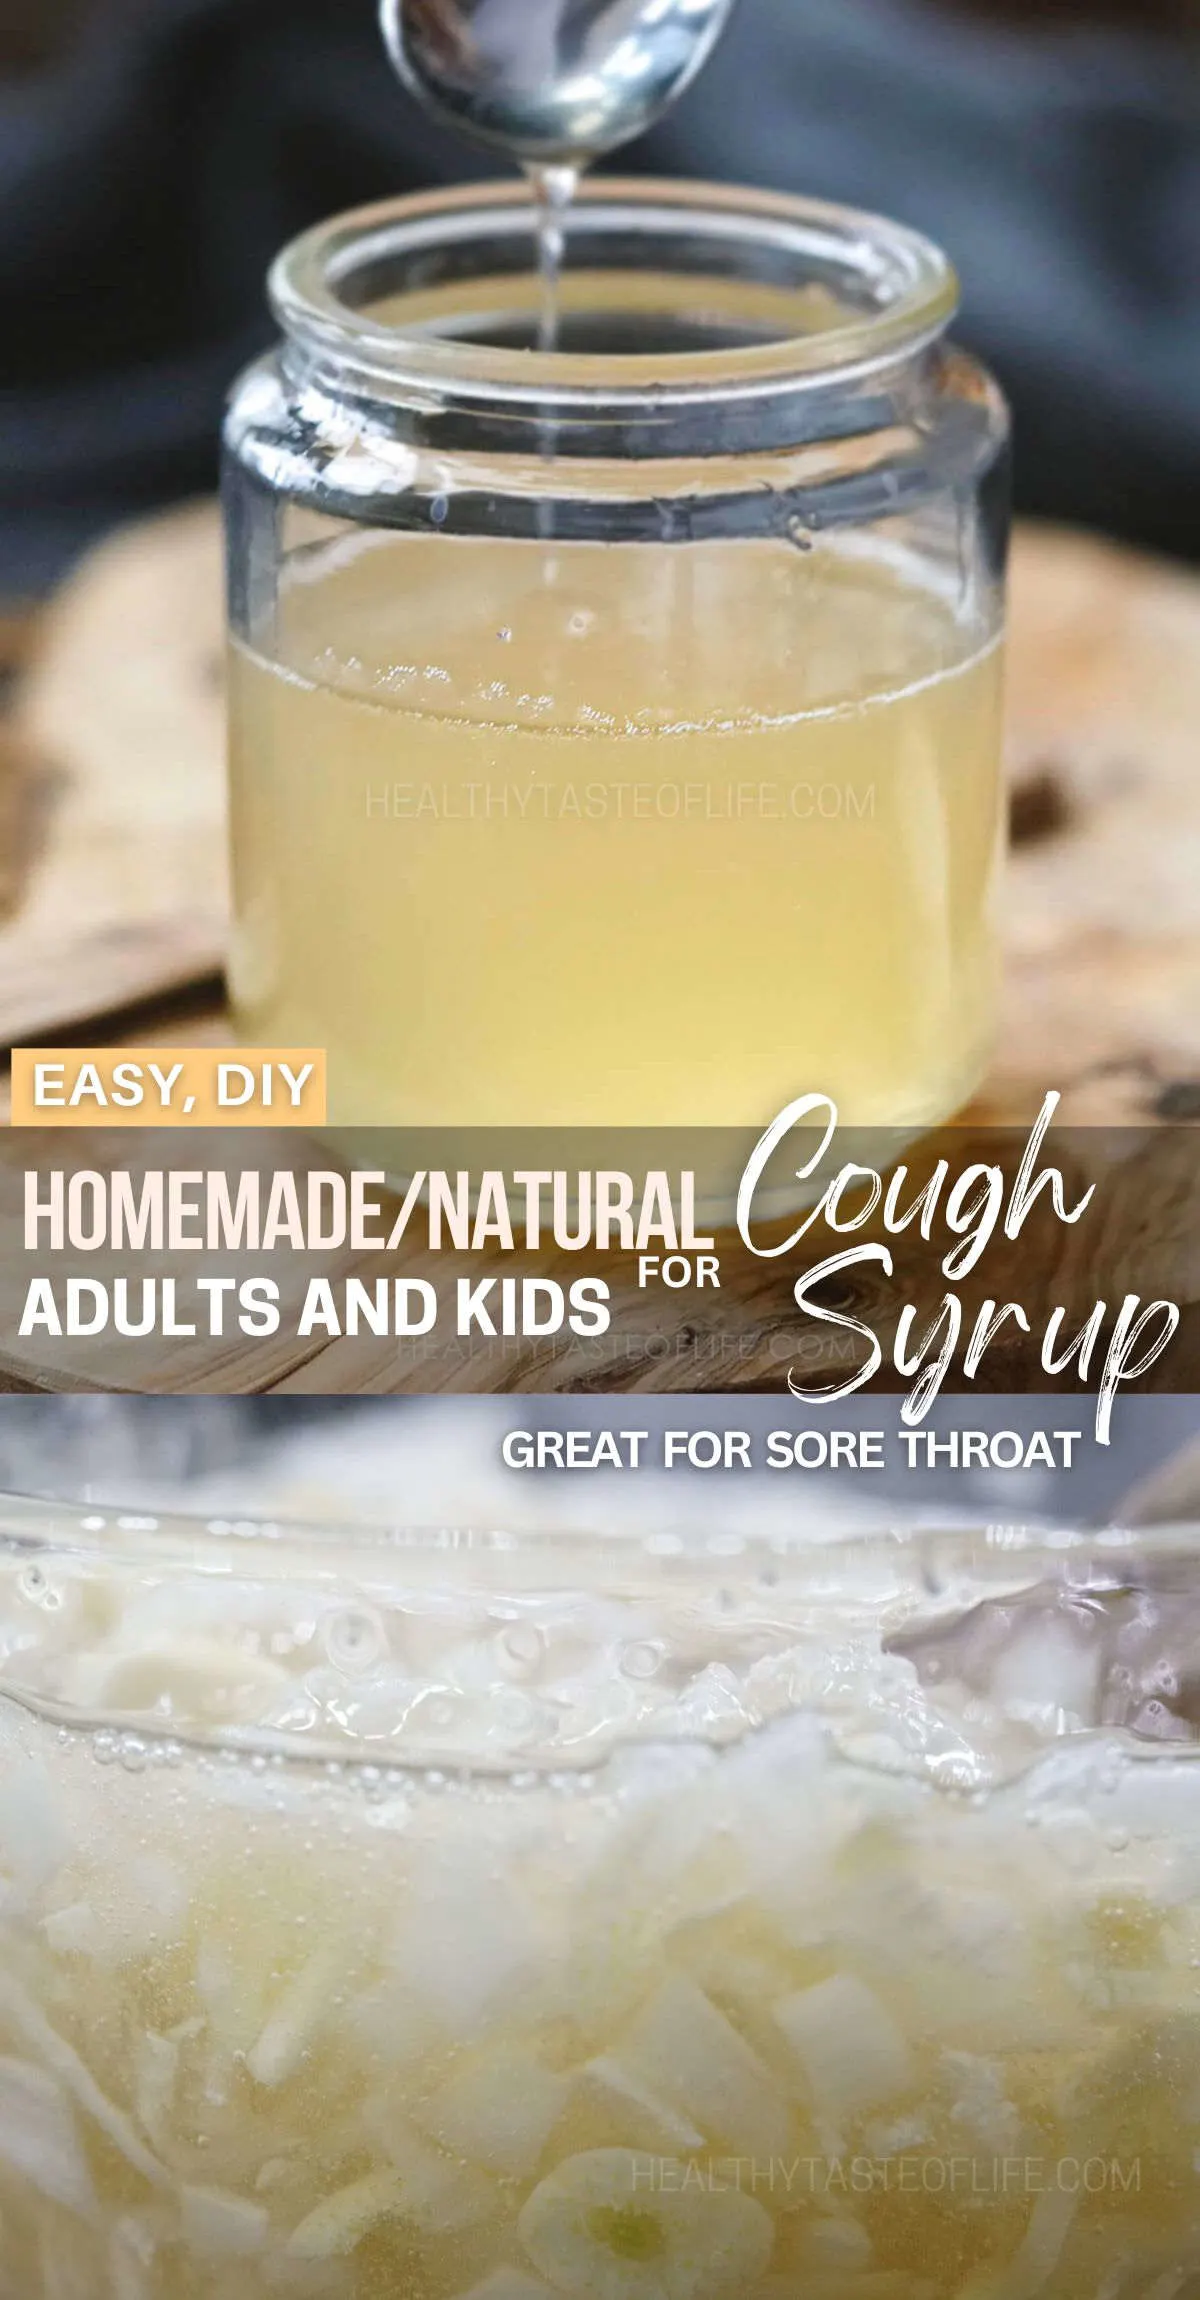 An effective homemade cough syrup, great for a sore throat too. Making this homemade cough syrup recipe is simple and easy. This natural diy cough syrup combines honey, onion, garlic and black radish – it relieves the cold symptoms and cough naturally. This natural syrup for cough is great for all ages! Small children above 12 months can have it.